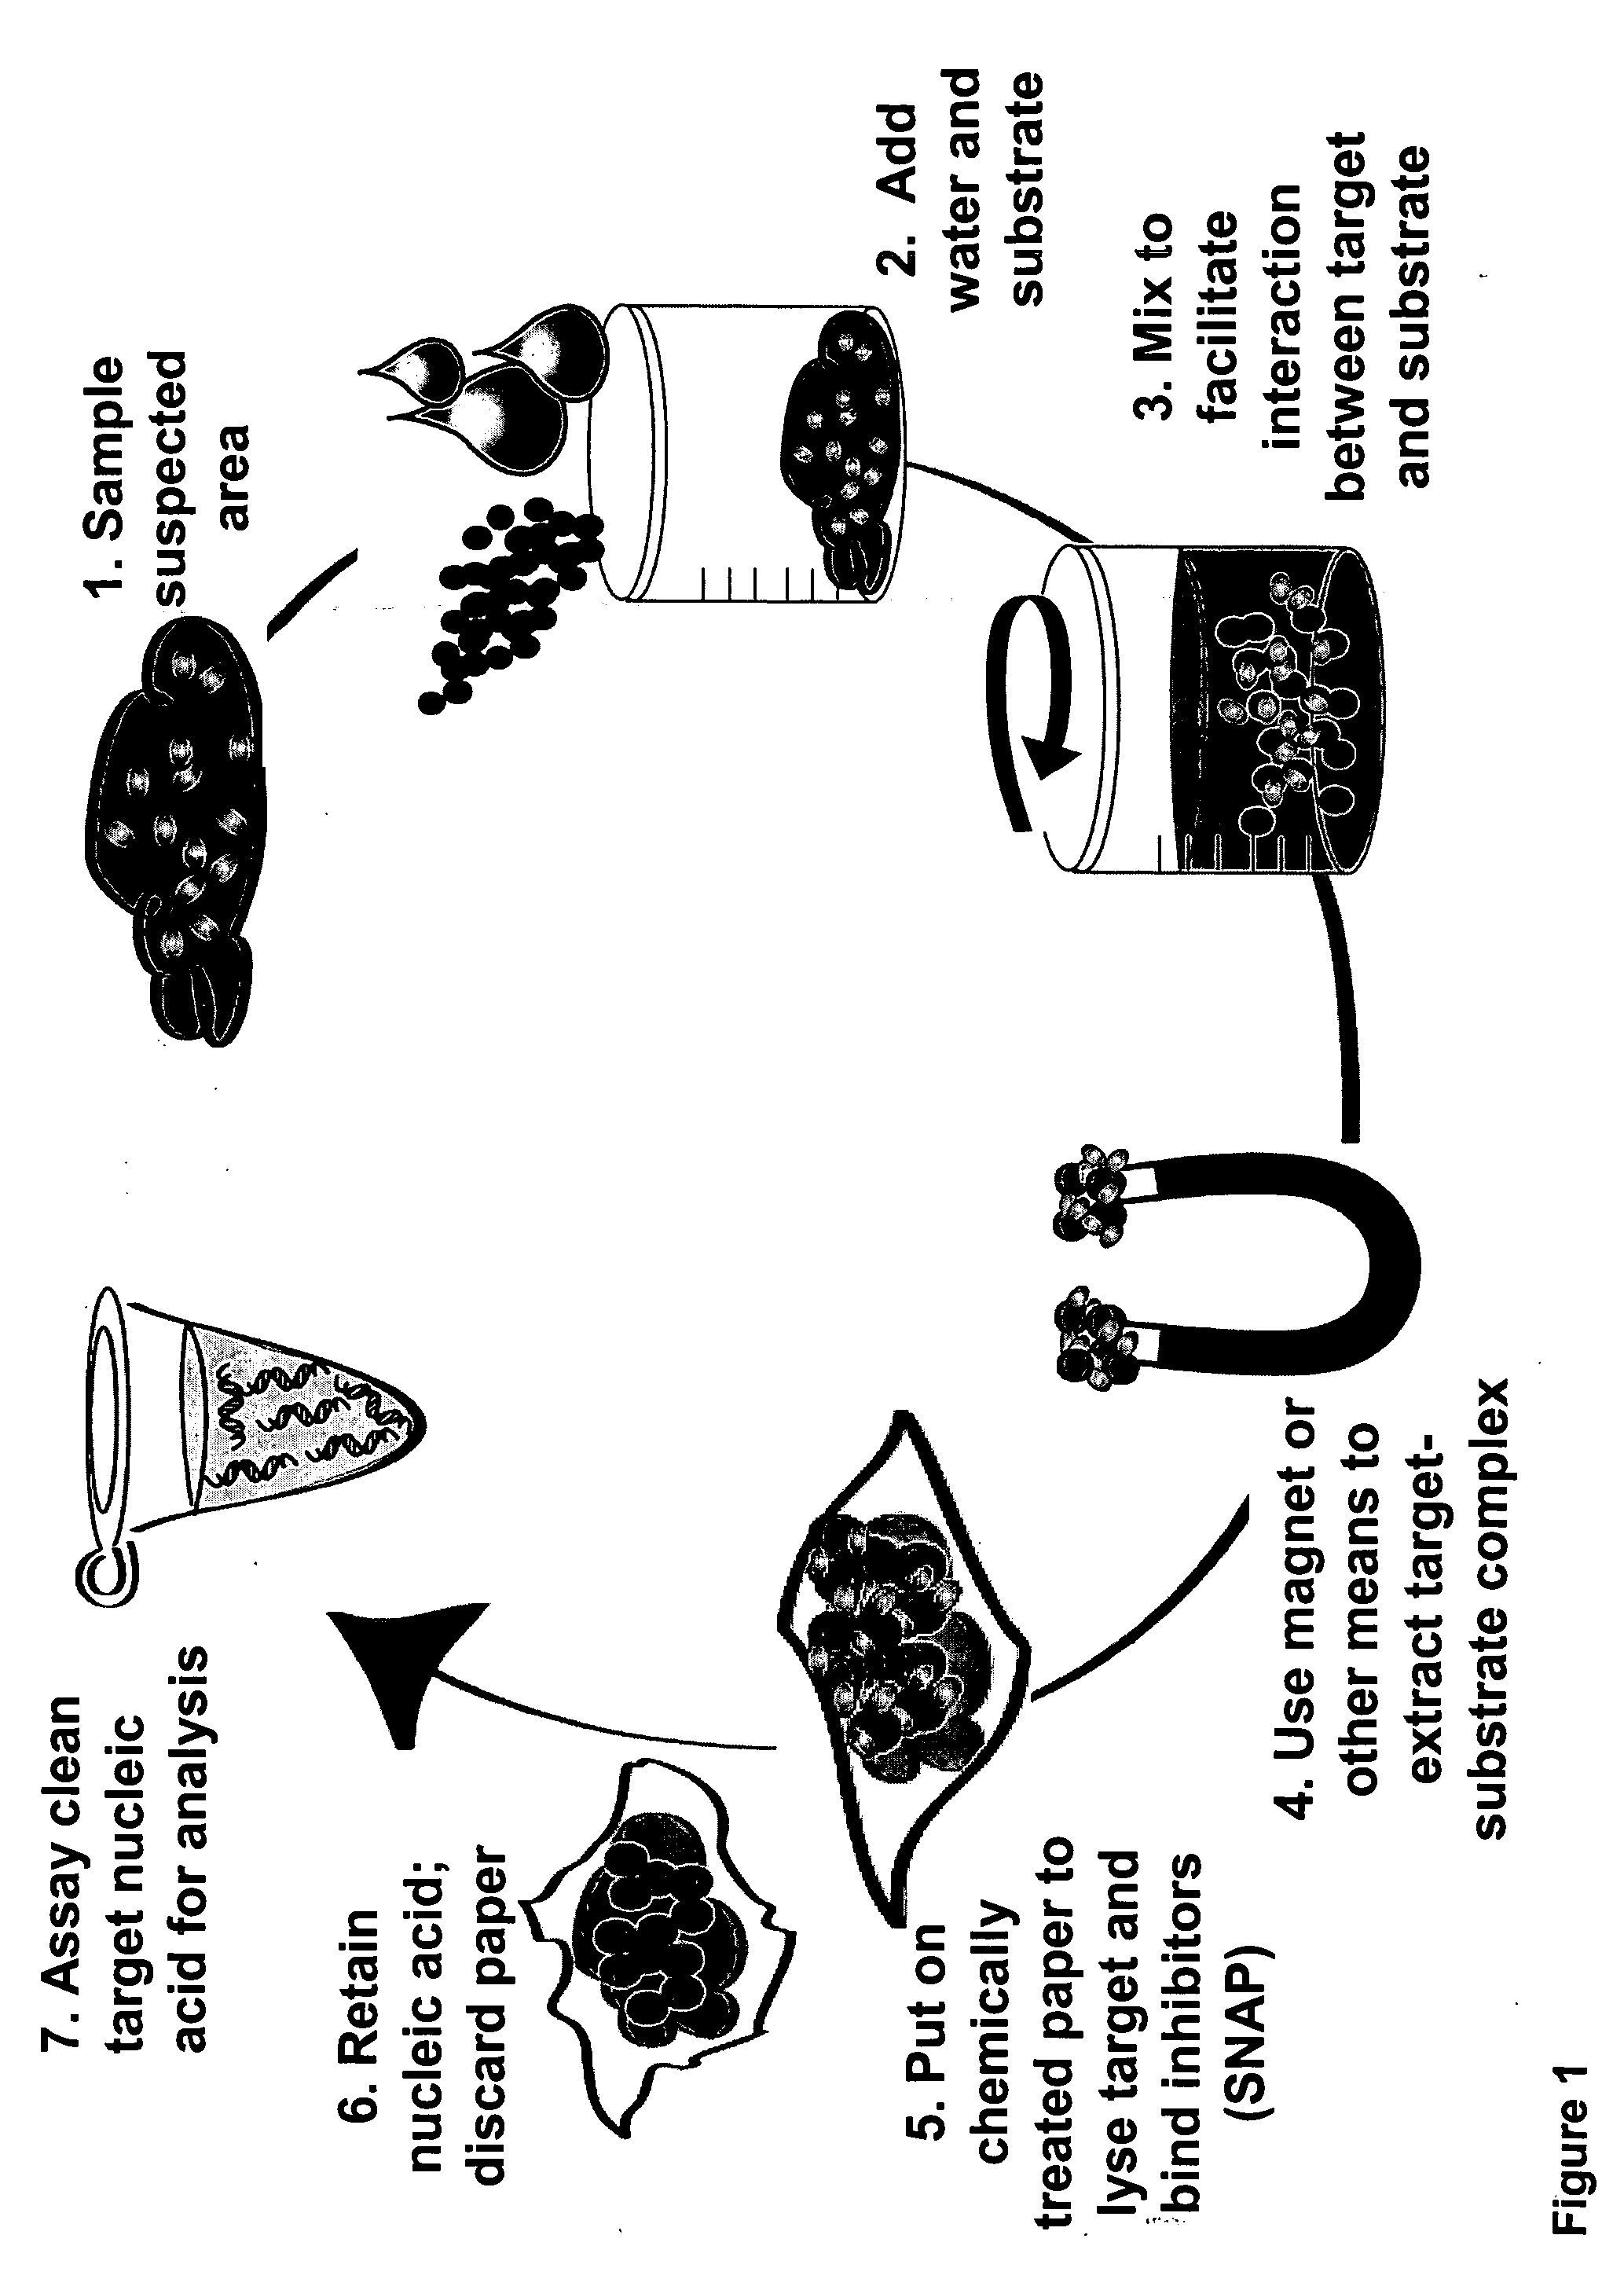 Sample preparation methods and devices